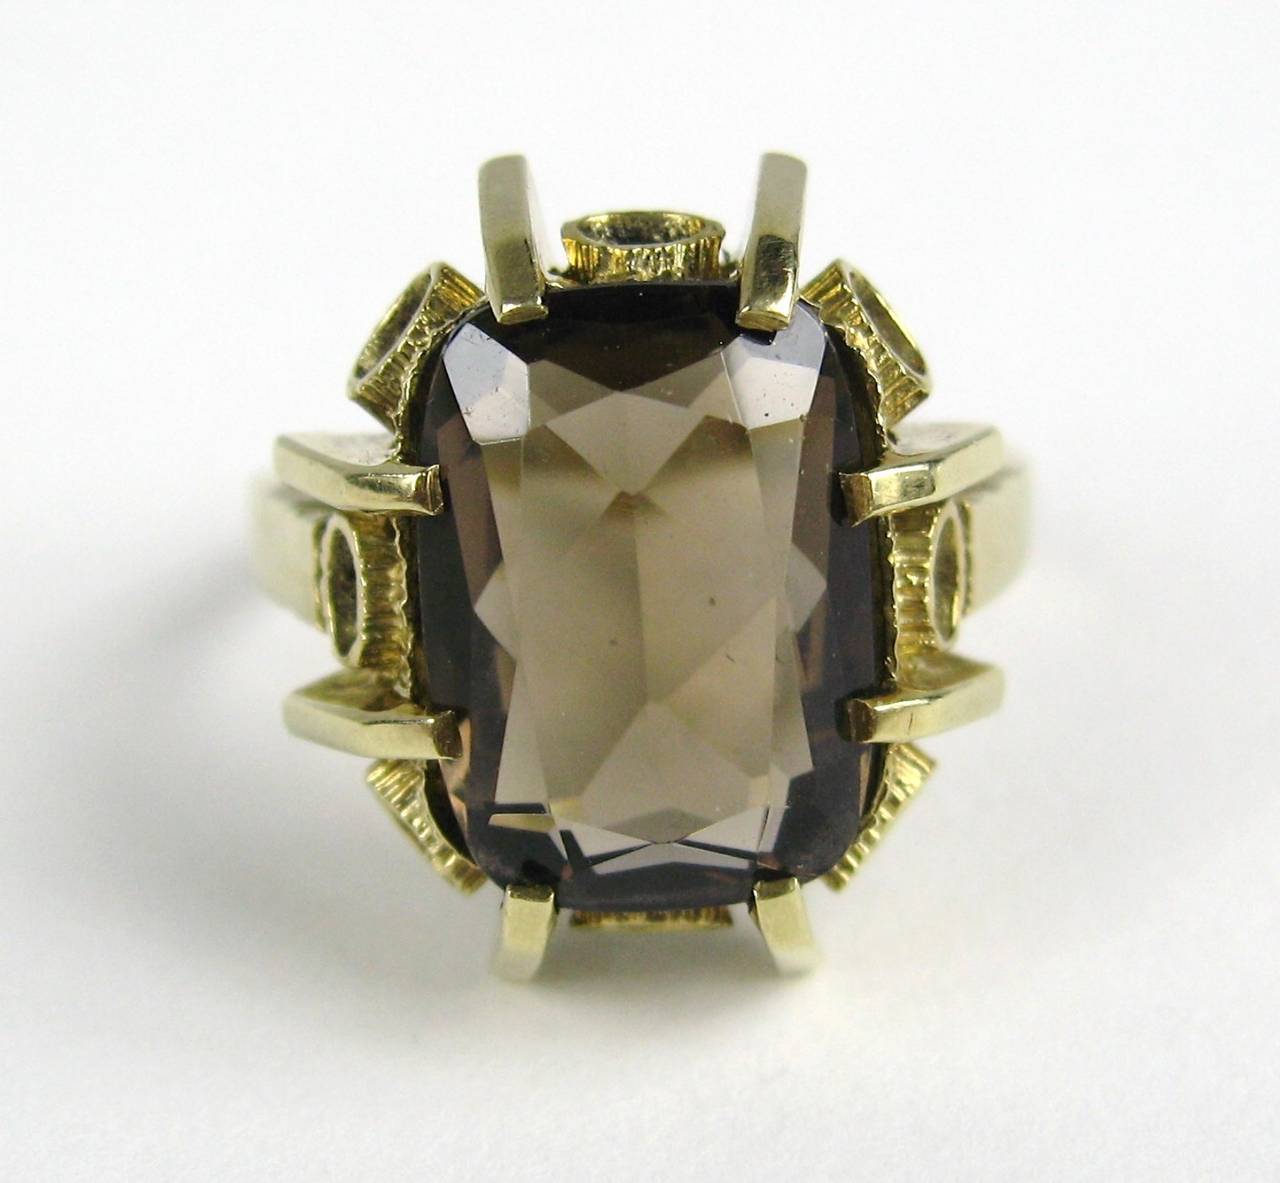 Lovely Mid Century Smokey Quartz Ring with Large Prong detailing. L'anneau mesure 0,77